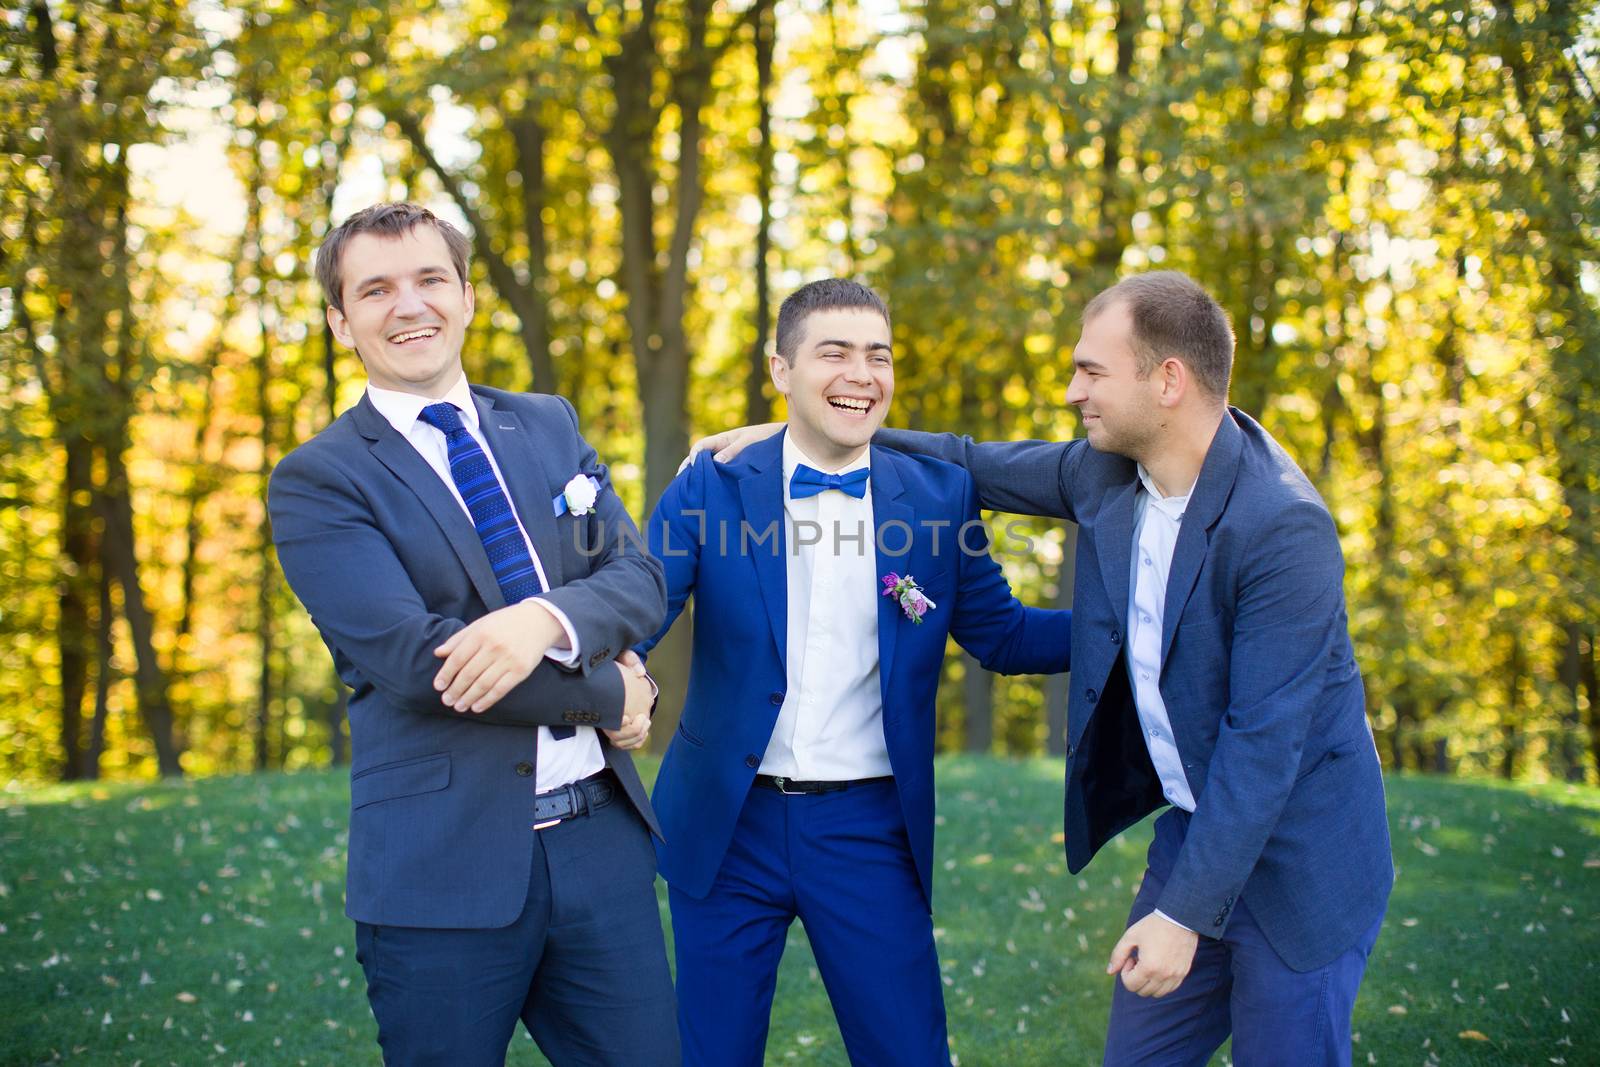 Friends laughing at the wedding of a friend by lanser314